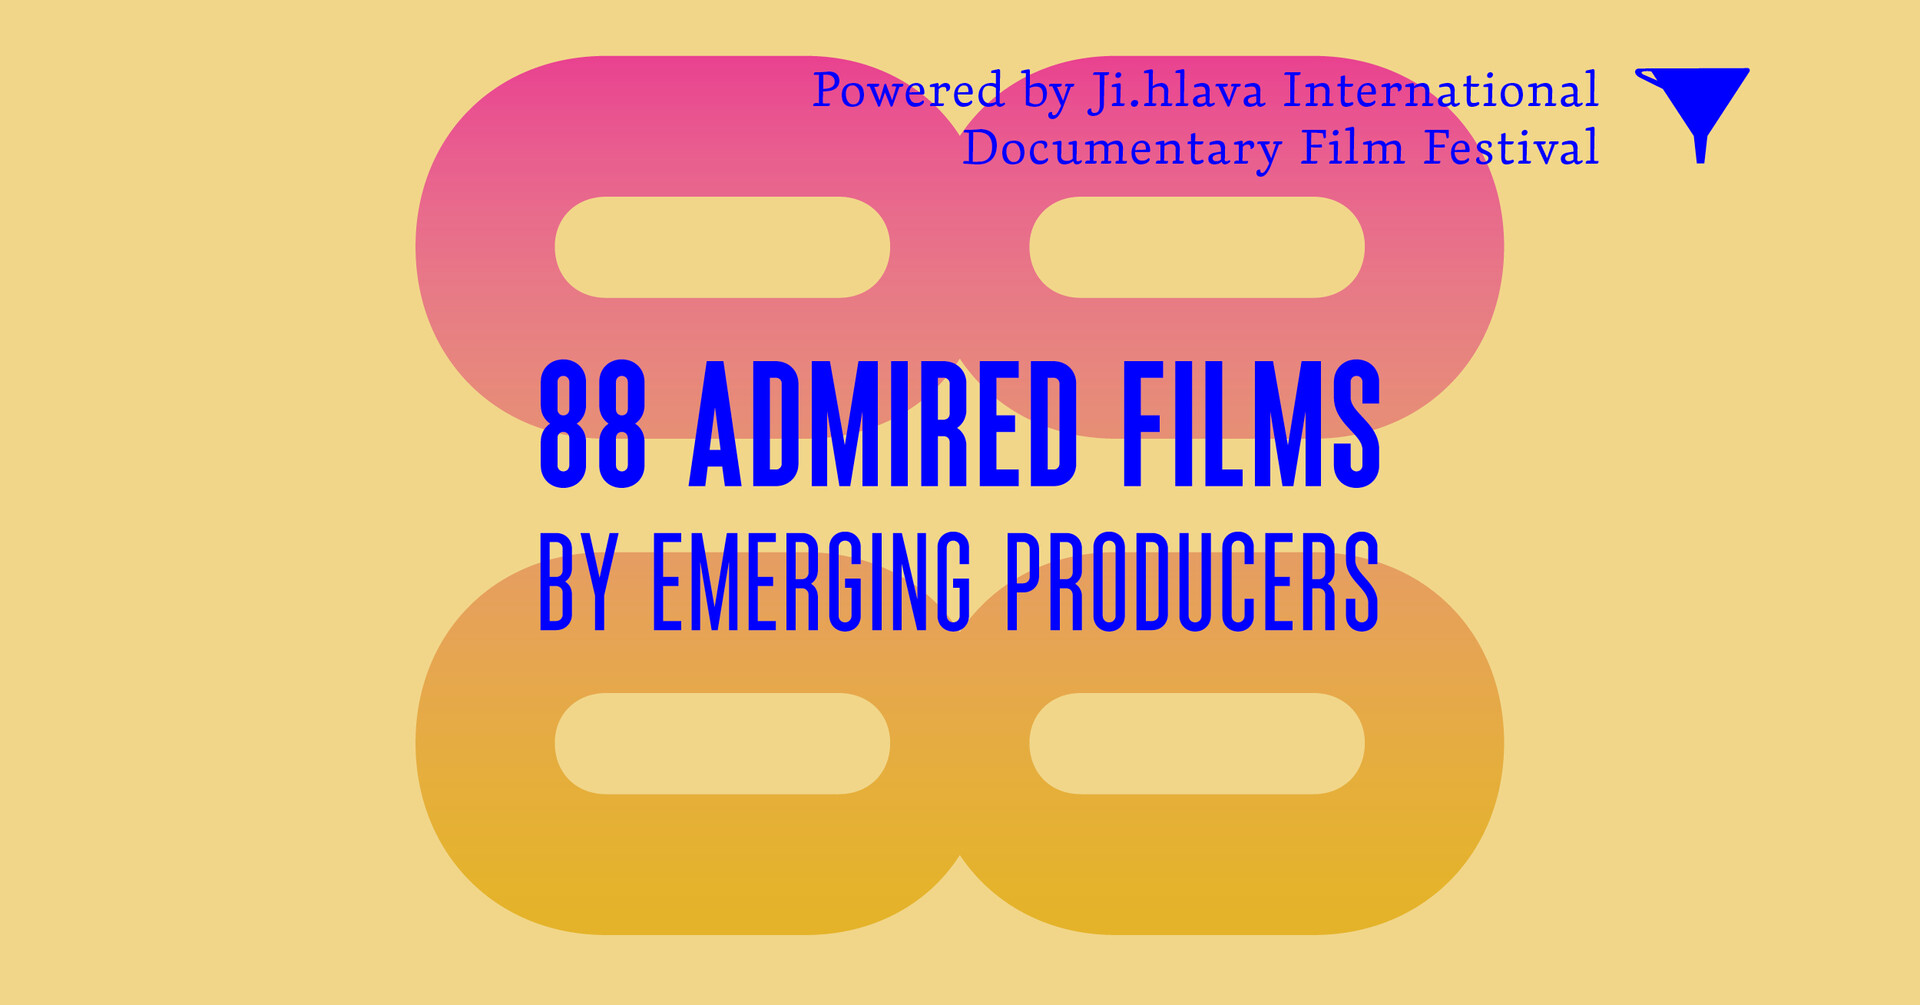 88 Admired Films by EMERGING PRODUCERS